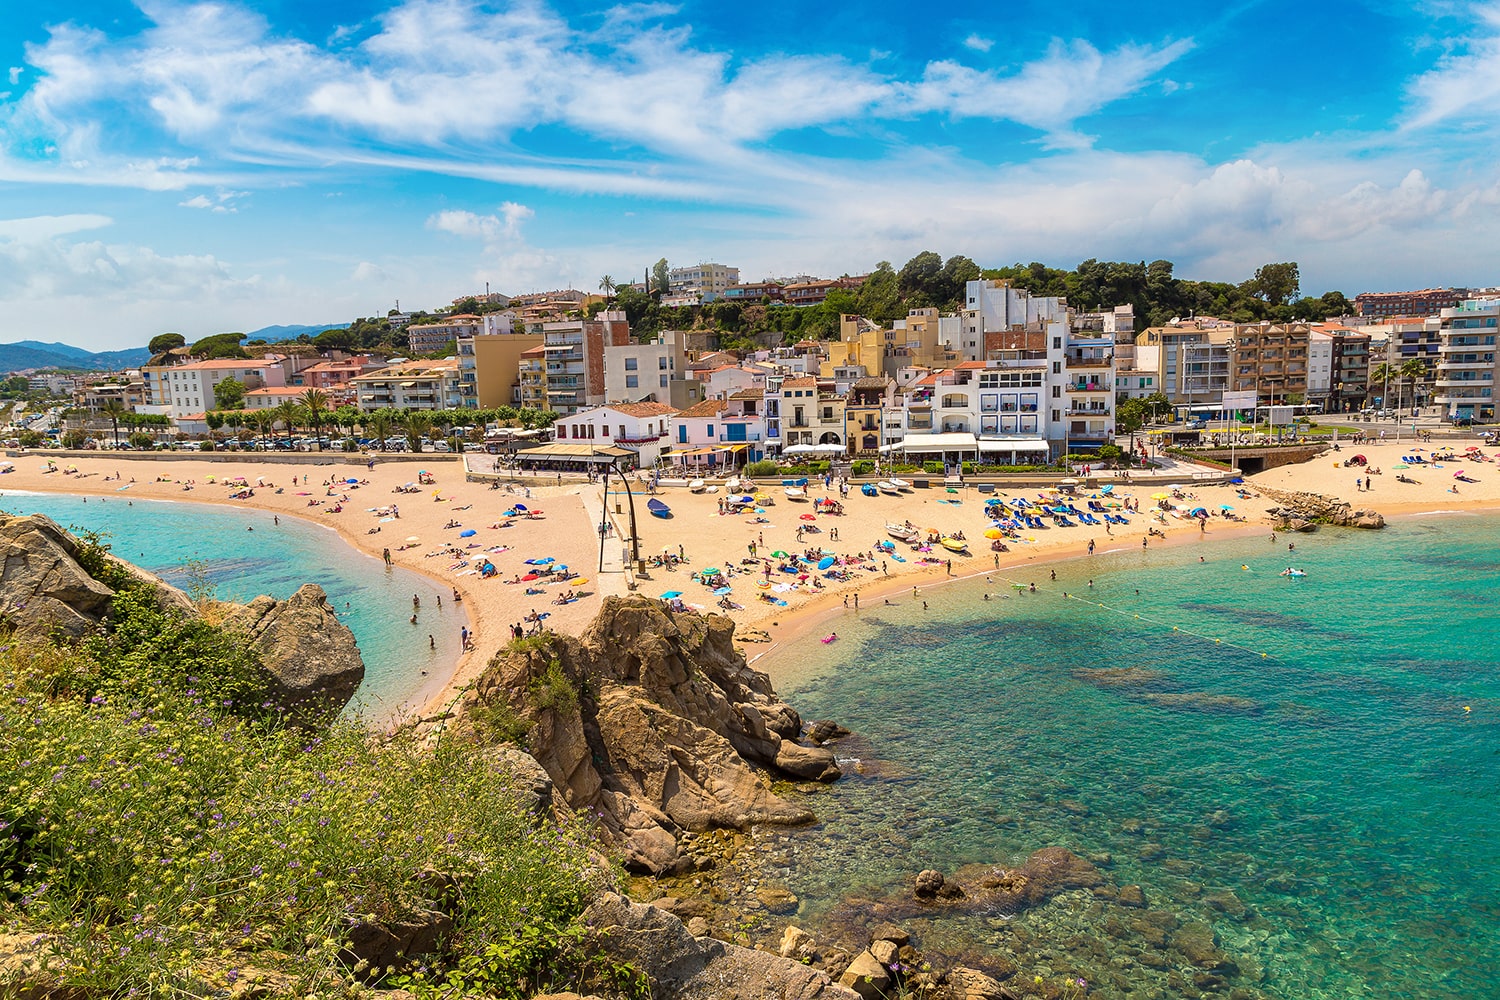 Costa Brava or Costa Blanca? Top reasons to visit both - Discover ...